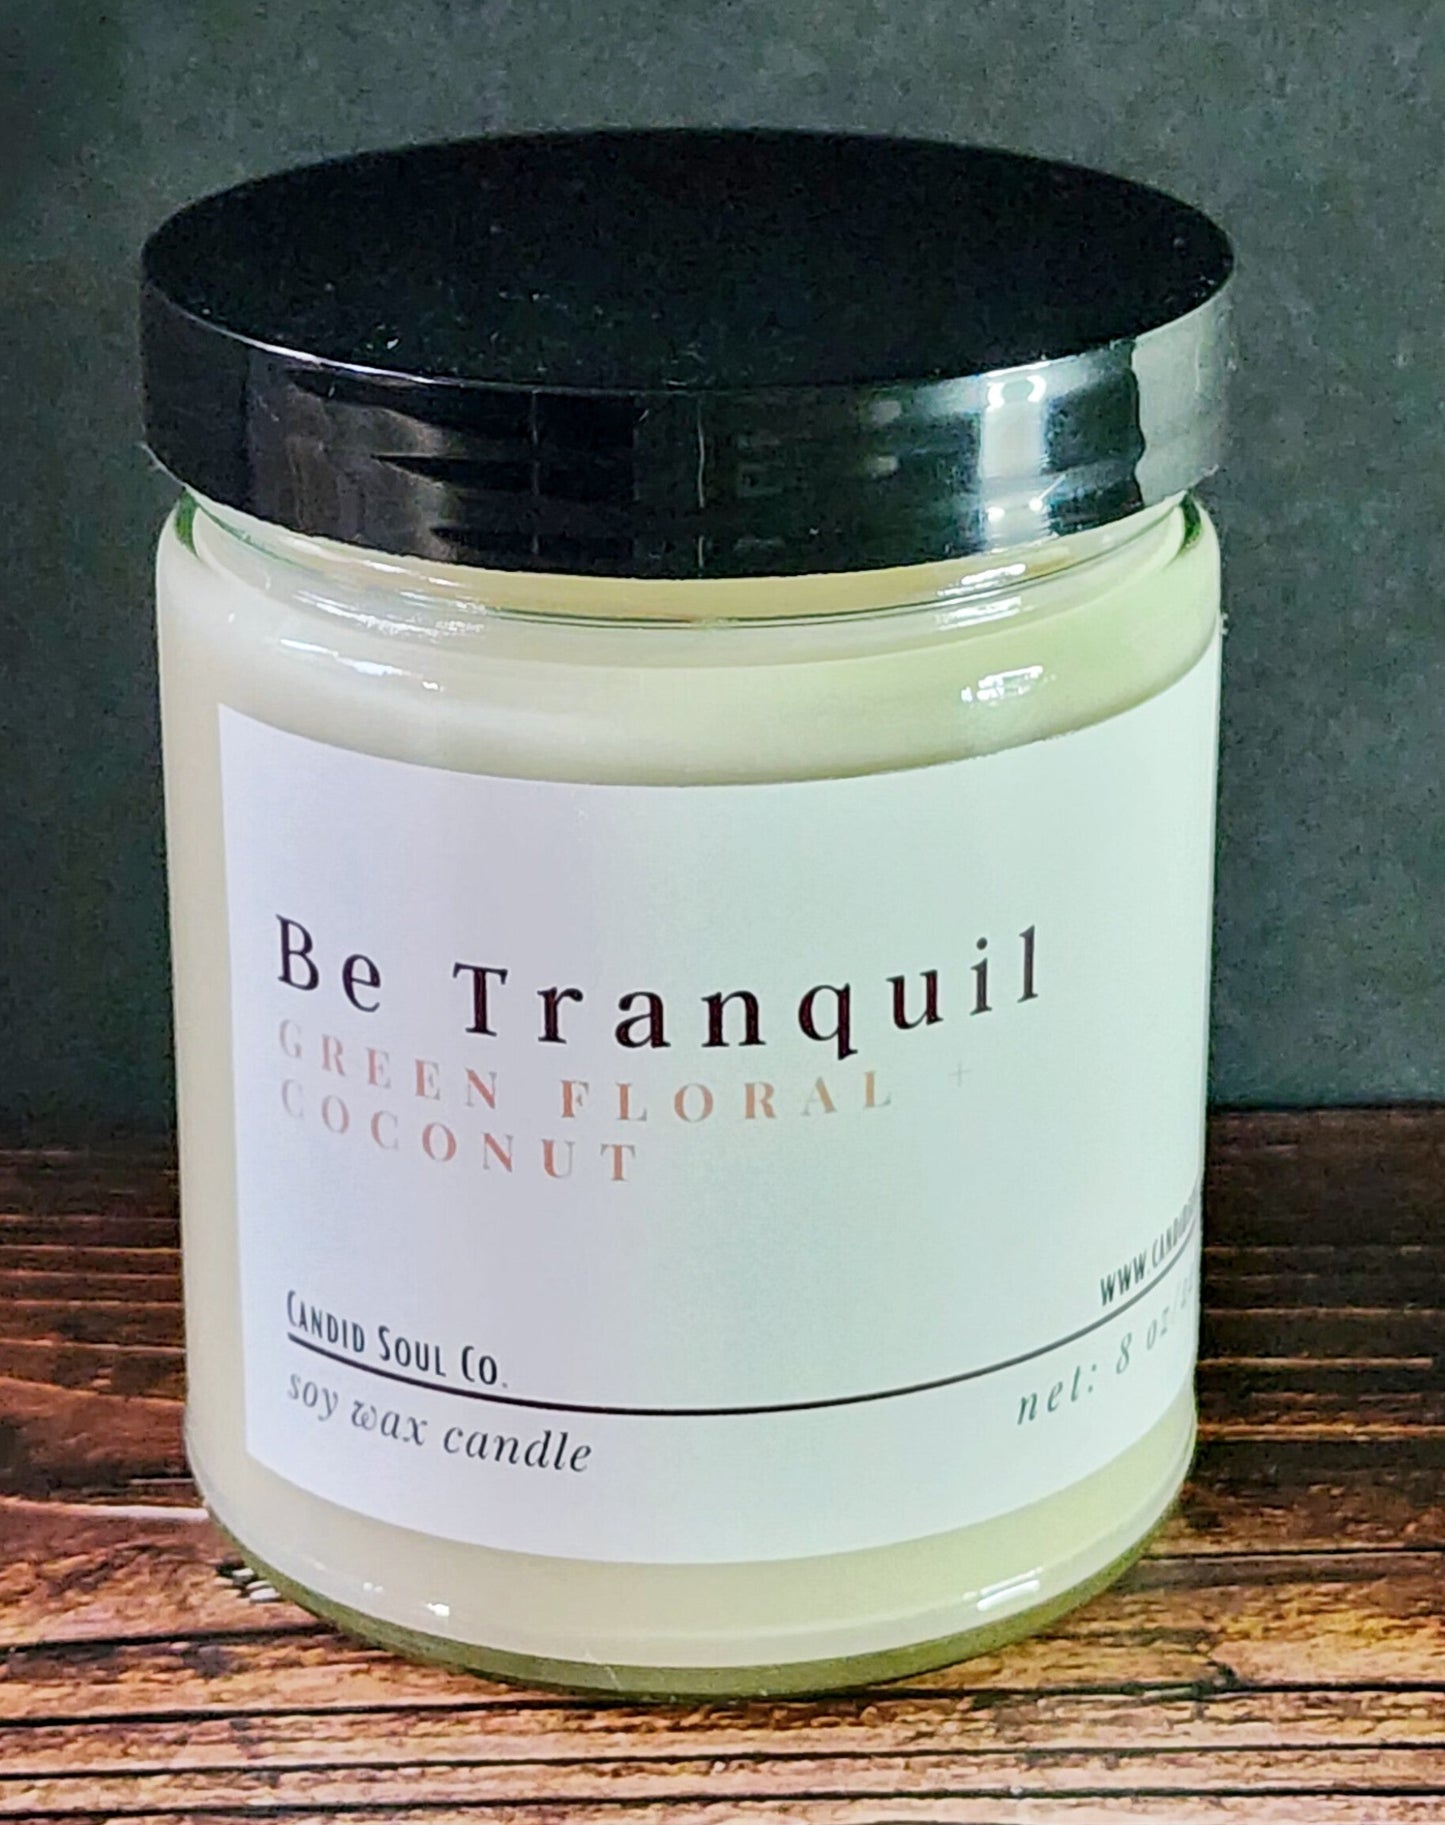 Be Tranquil: Scented Soy Wax Affirmation Candle